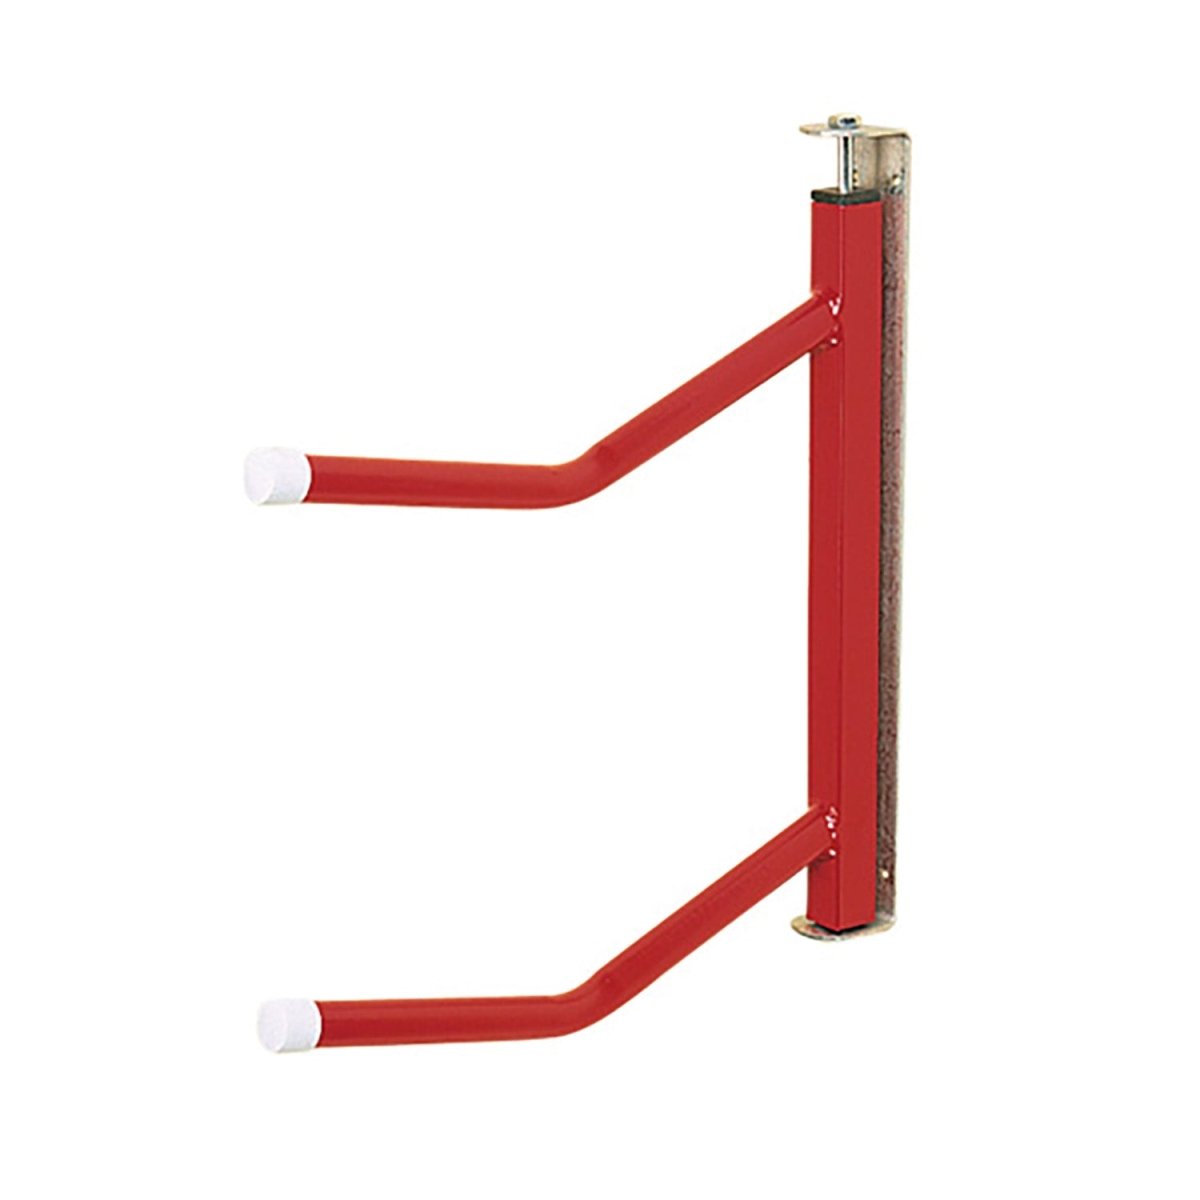 Stubbs Saddle Rack Twin Arm Swivelling S212 - Red -